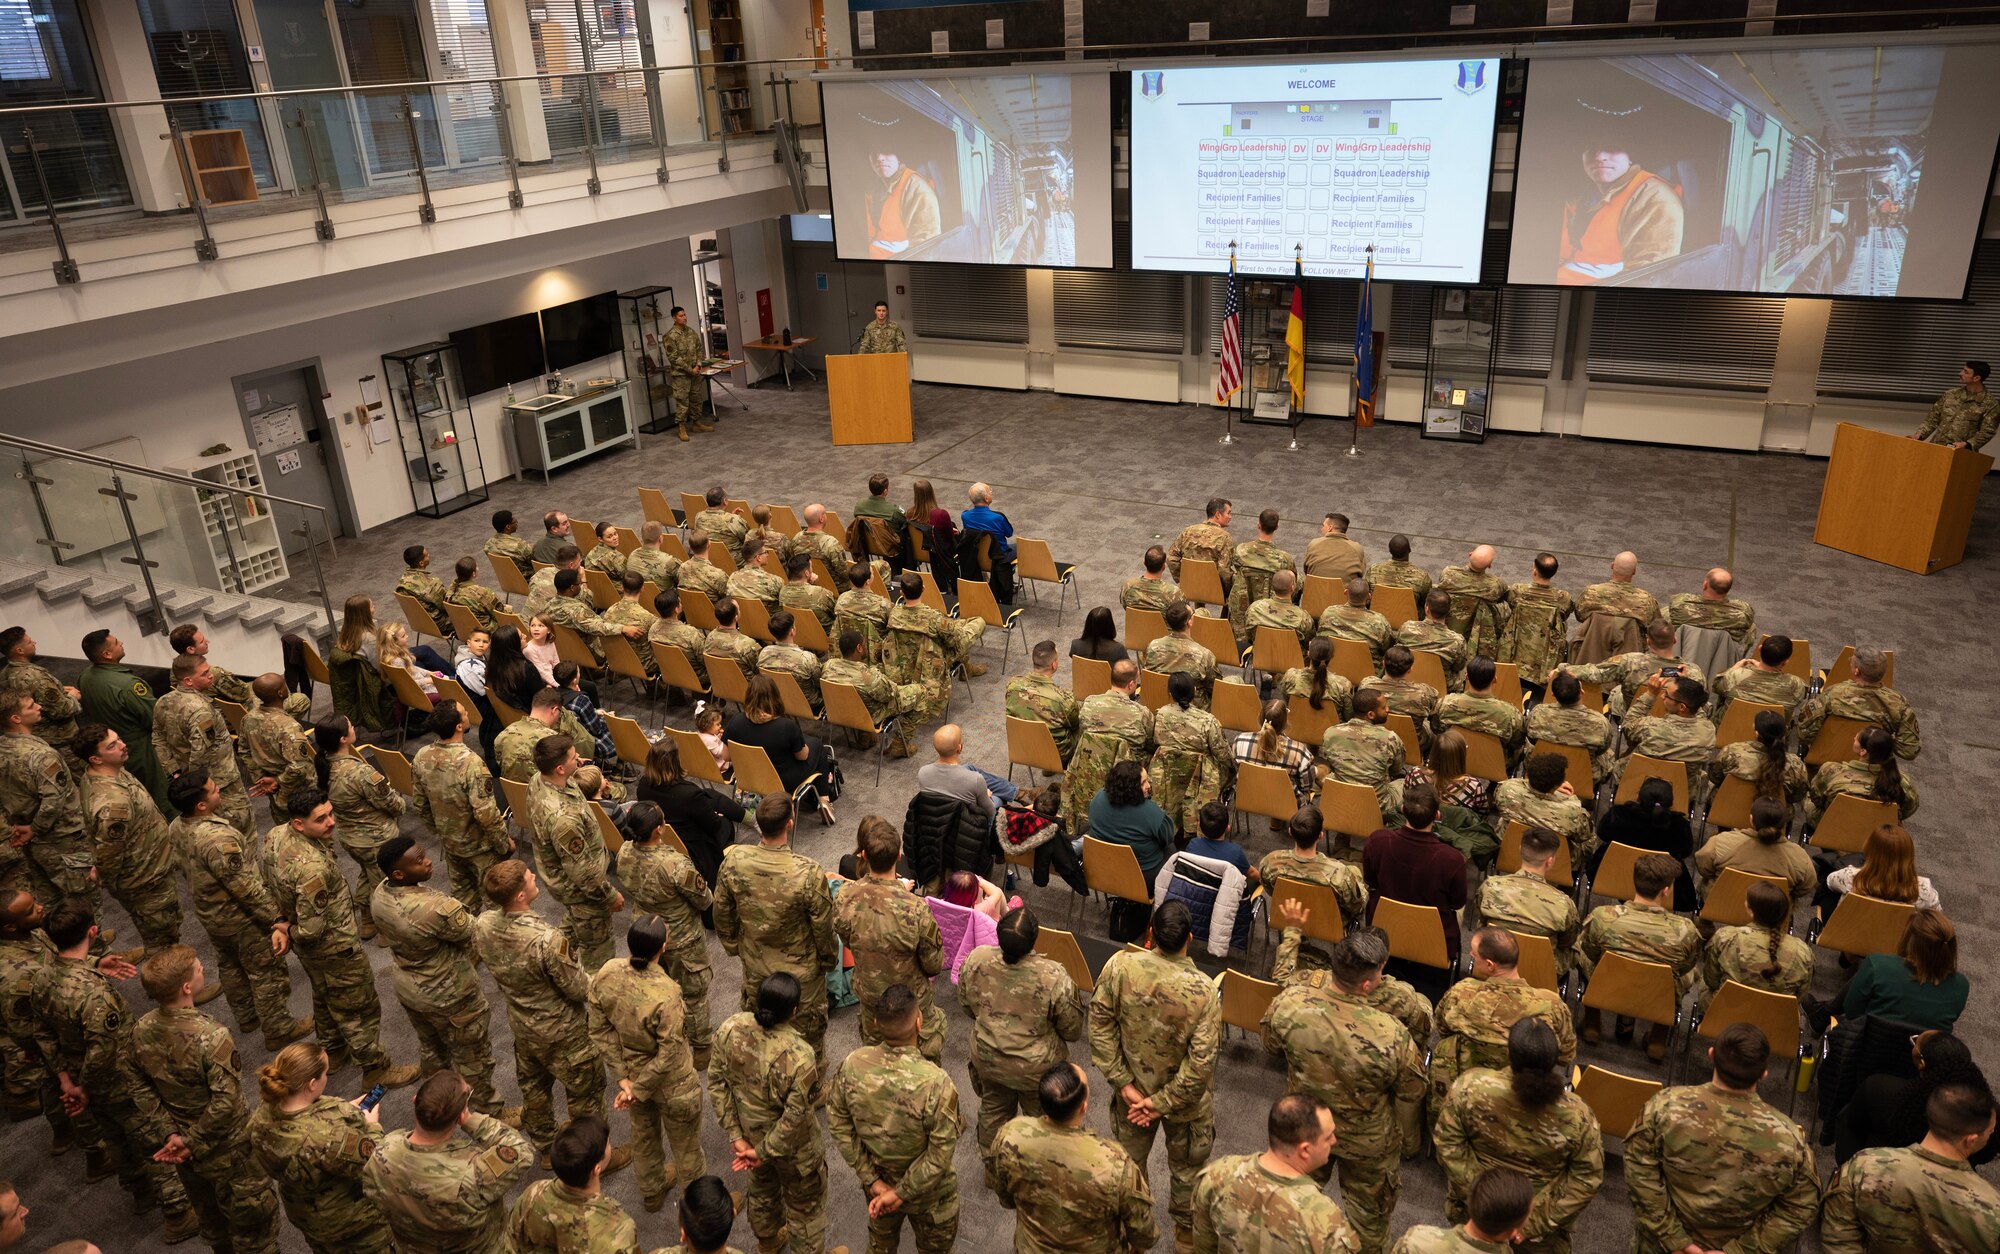 More than 200 members assigned to the 435th Air Ground Operations Wing, 521st Air Mobility Wing, 86th Airlift Wing, here, and the 52th Fighter Wing, located at Spangdahlem Air Base, received Air Force decorations during an award ceremony at Ramstein Air Base, Germany, Feb. 3, 2023.